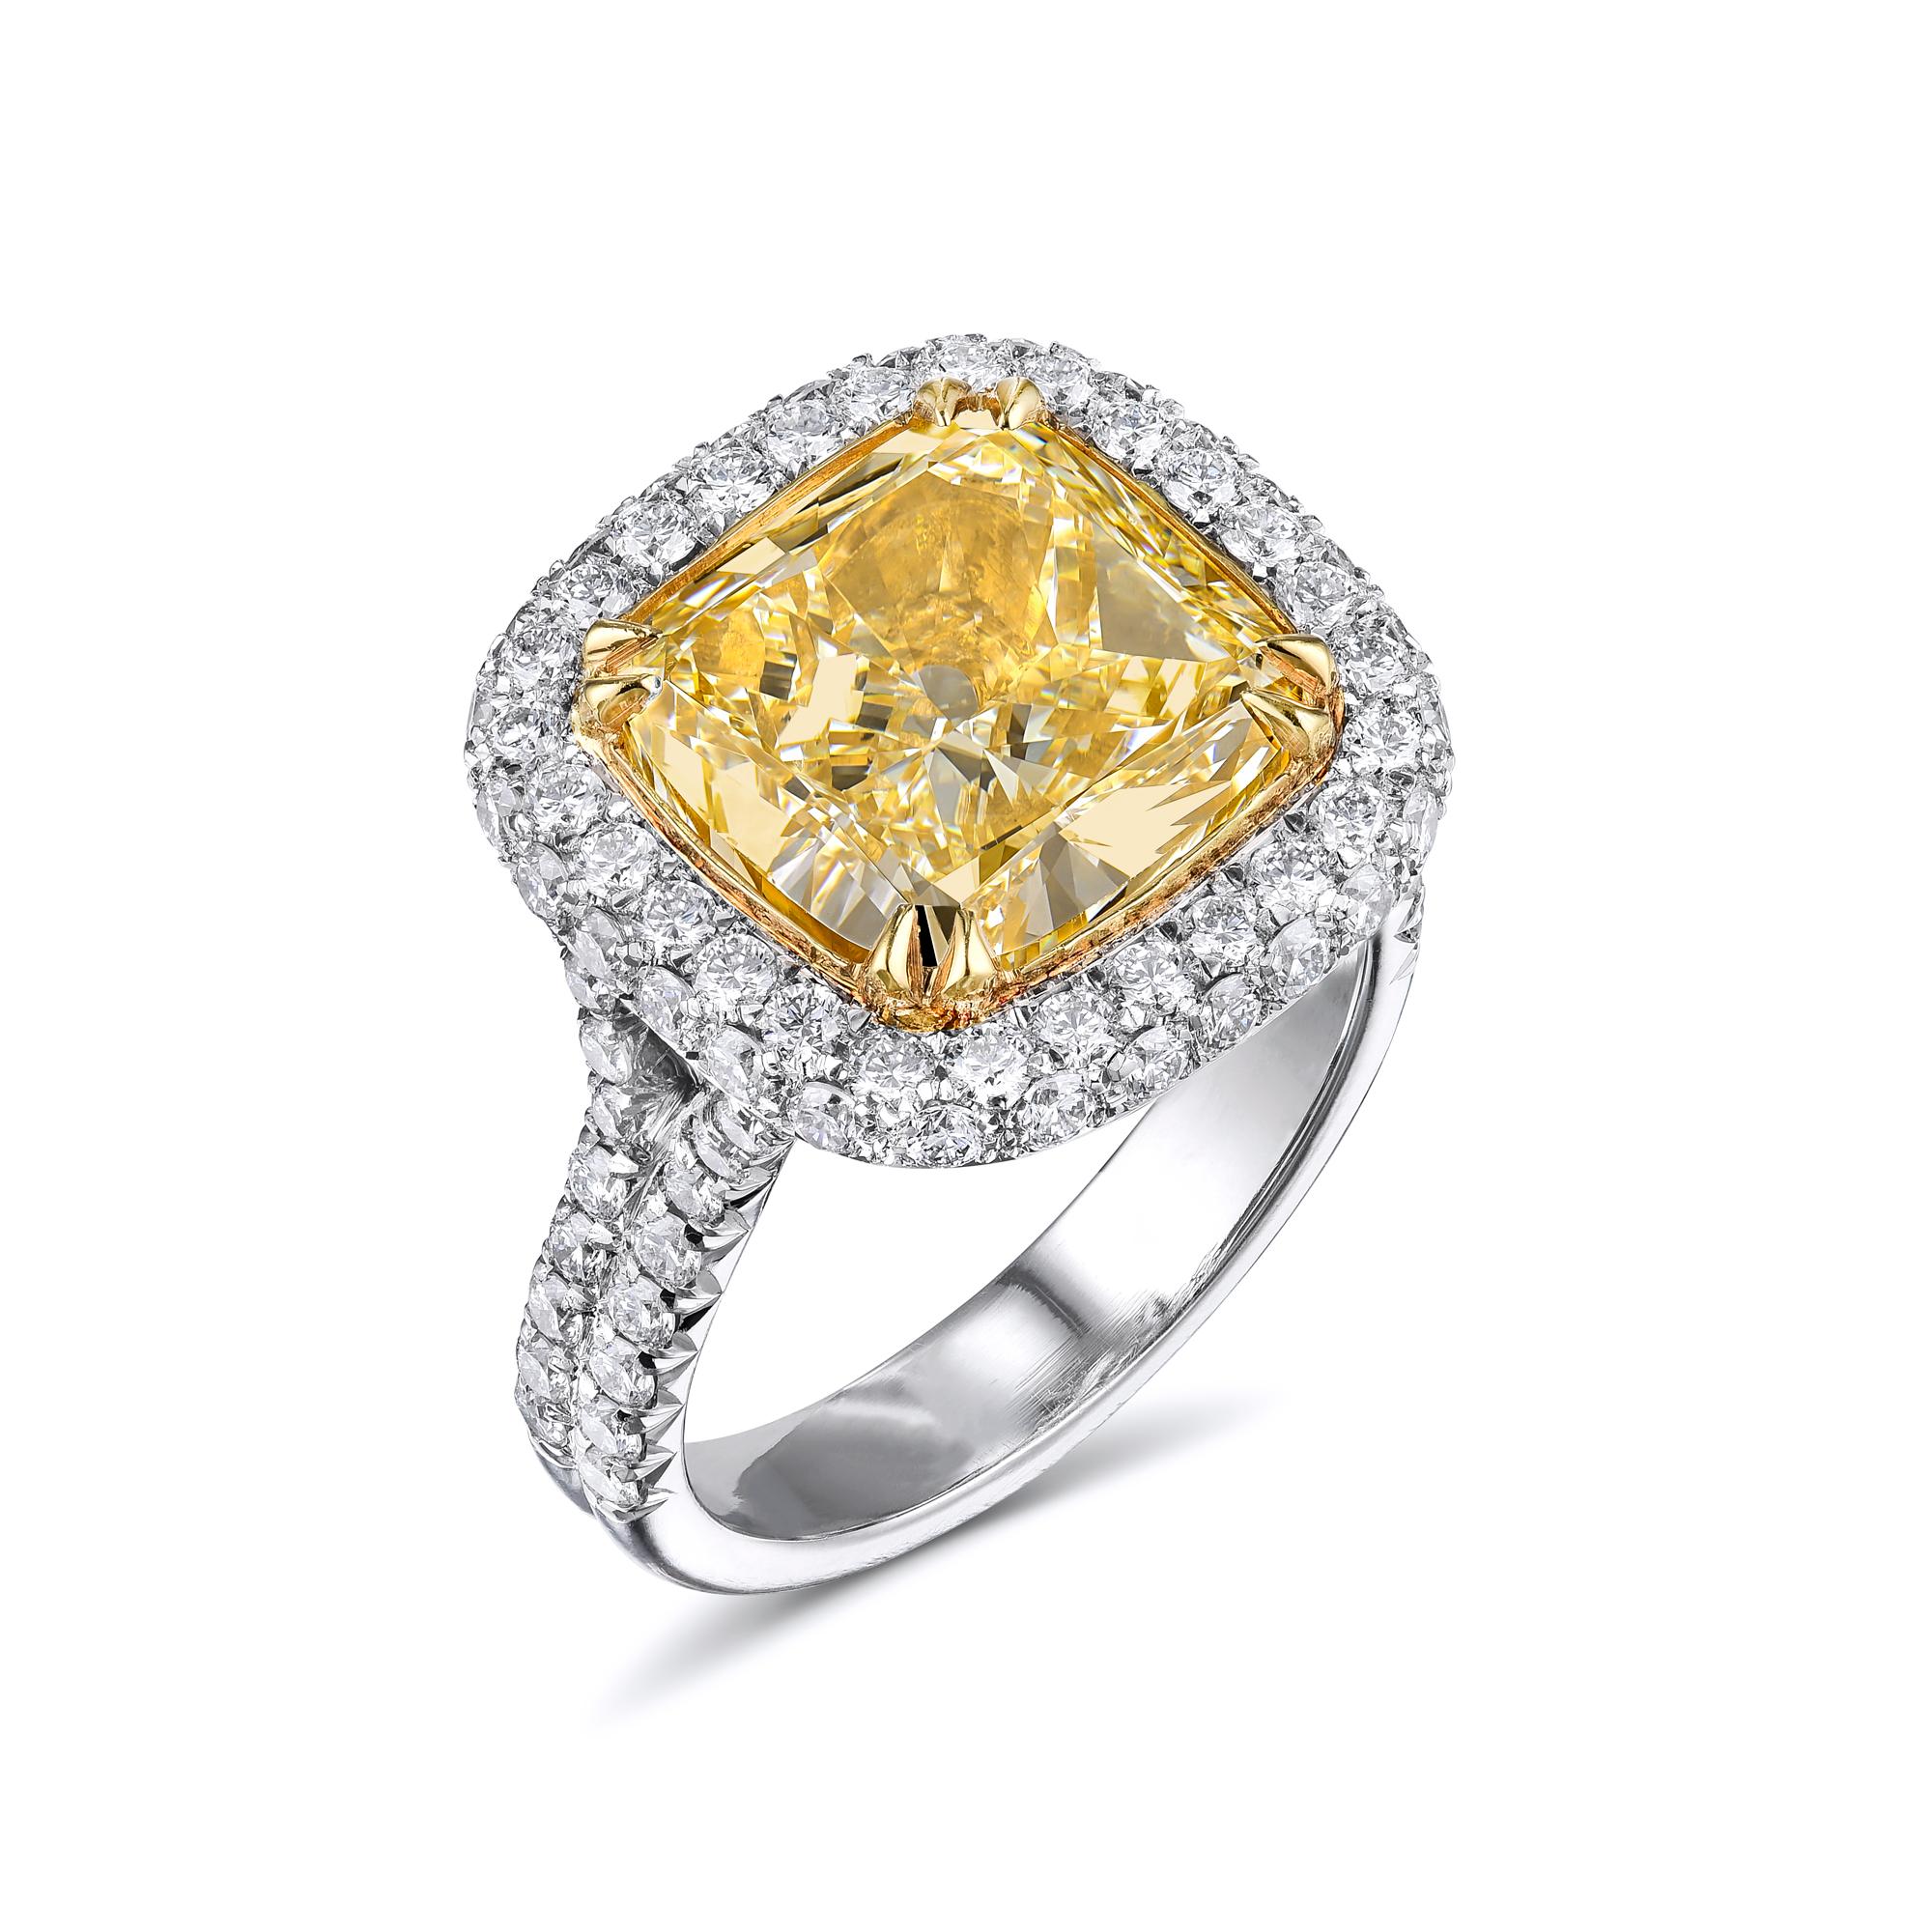 Diamond ring with GIA certificate, no.1162257236. Center stone: 6.11ct Cushion cut Fancy to Fancy Intense Yellow VS2 diamond, 10.6 x 10.4 x 6.14mm. Side stones: 1.25ct Brilliant Round diamonds: F-G VS1-SI1. Total carat weight: 7.36ct. EGL Report